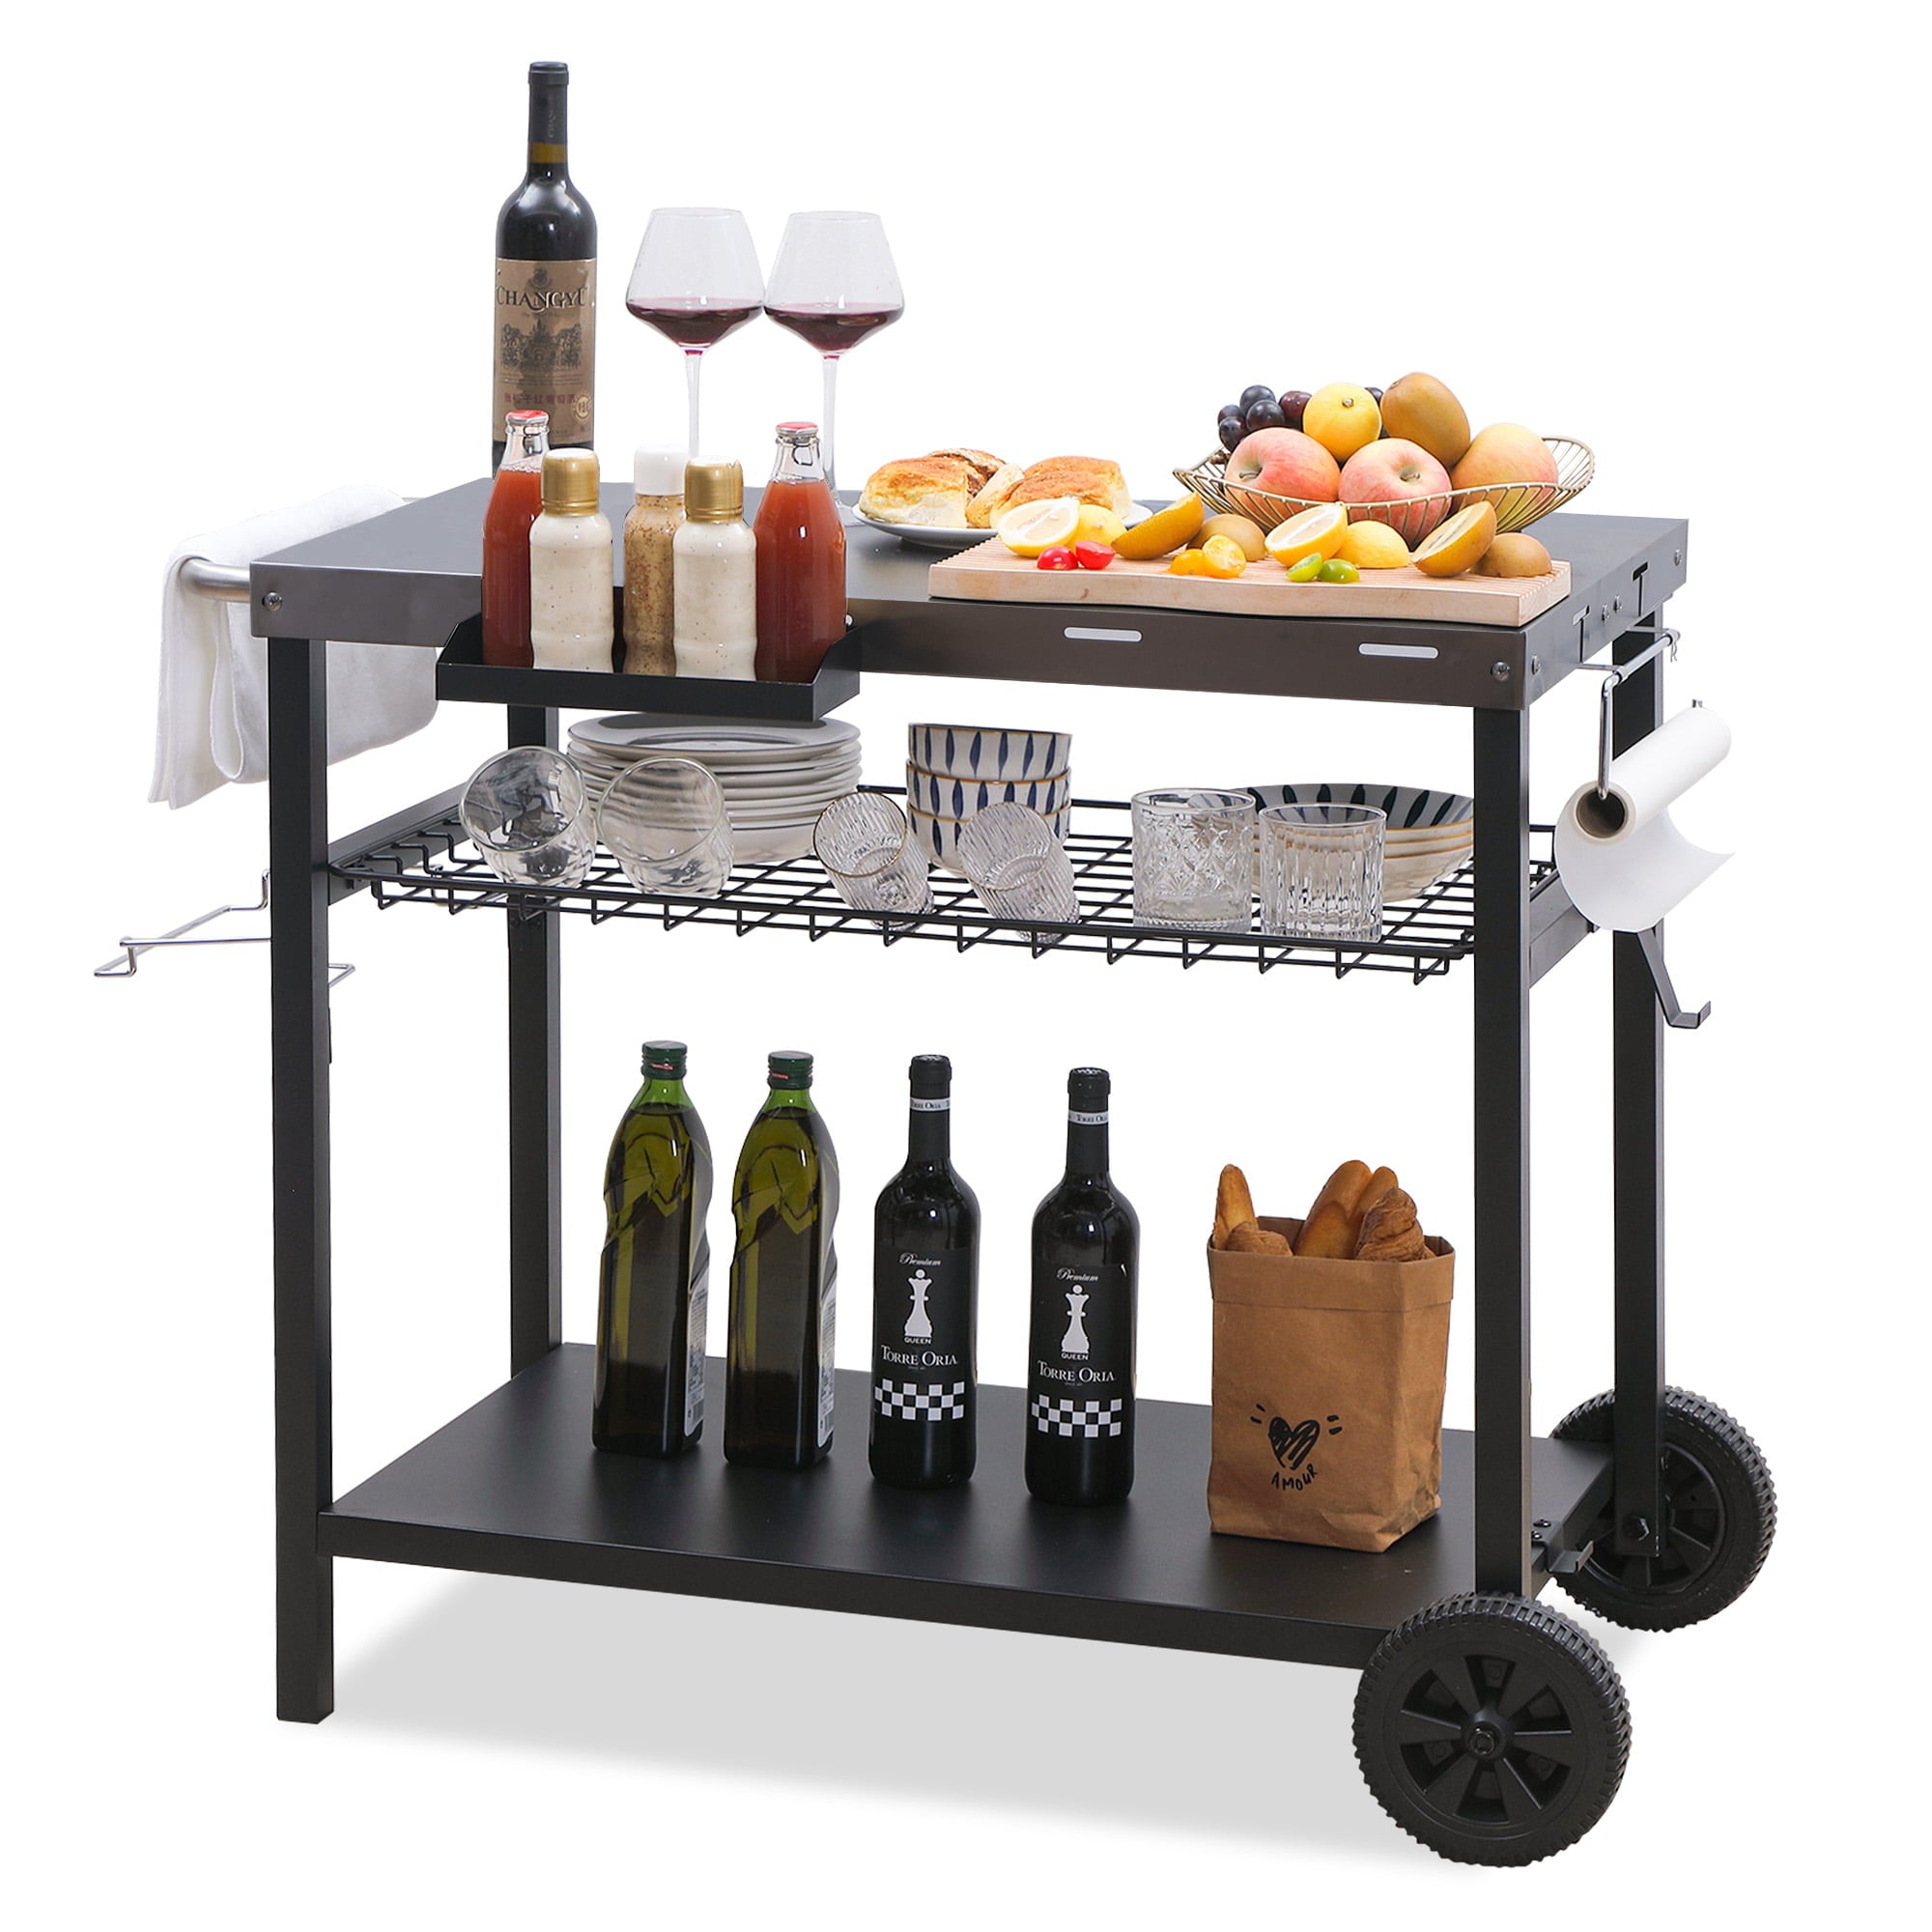 PIZZELLO Outdoor Bar Cart with Storage， Wheels， Handle， Hook， Trash Bag Holder， Paper Towel Holder， Movable Spice Rack - Silver Stainless Steel Tabletop